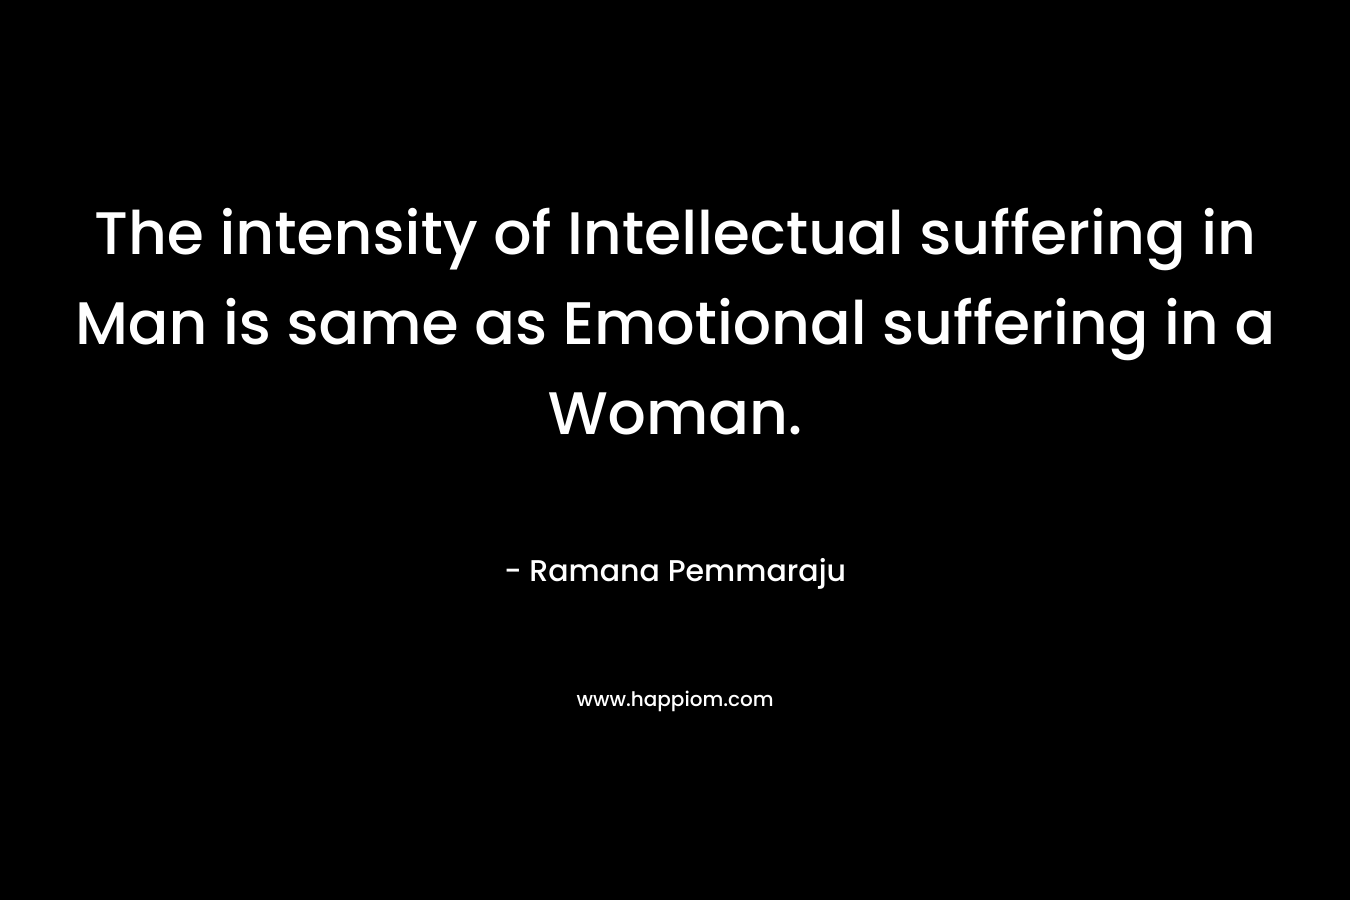 The intensity of Intellectual suffering in Man is same as Emotional suffering in a Woman.